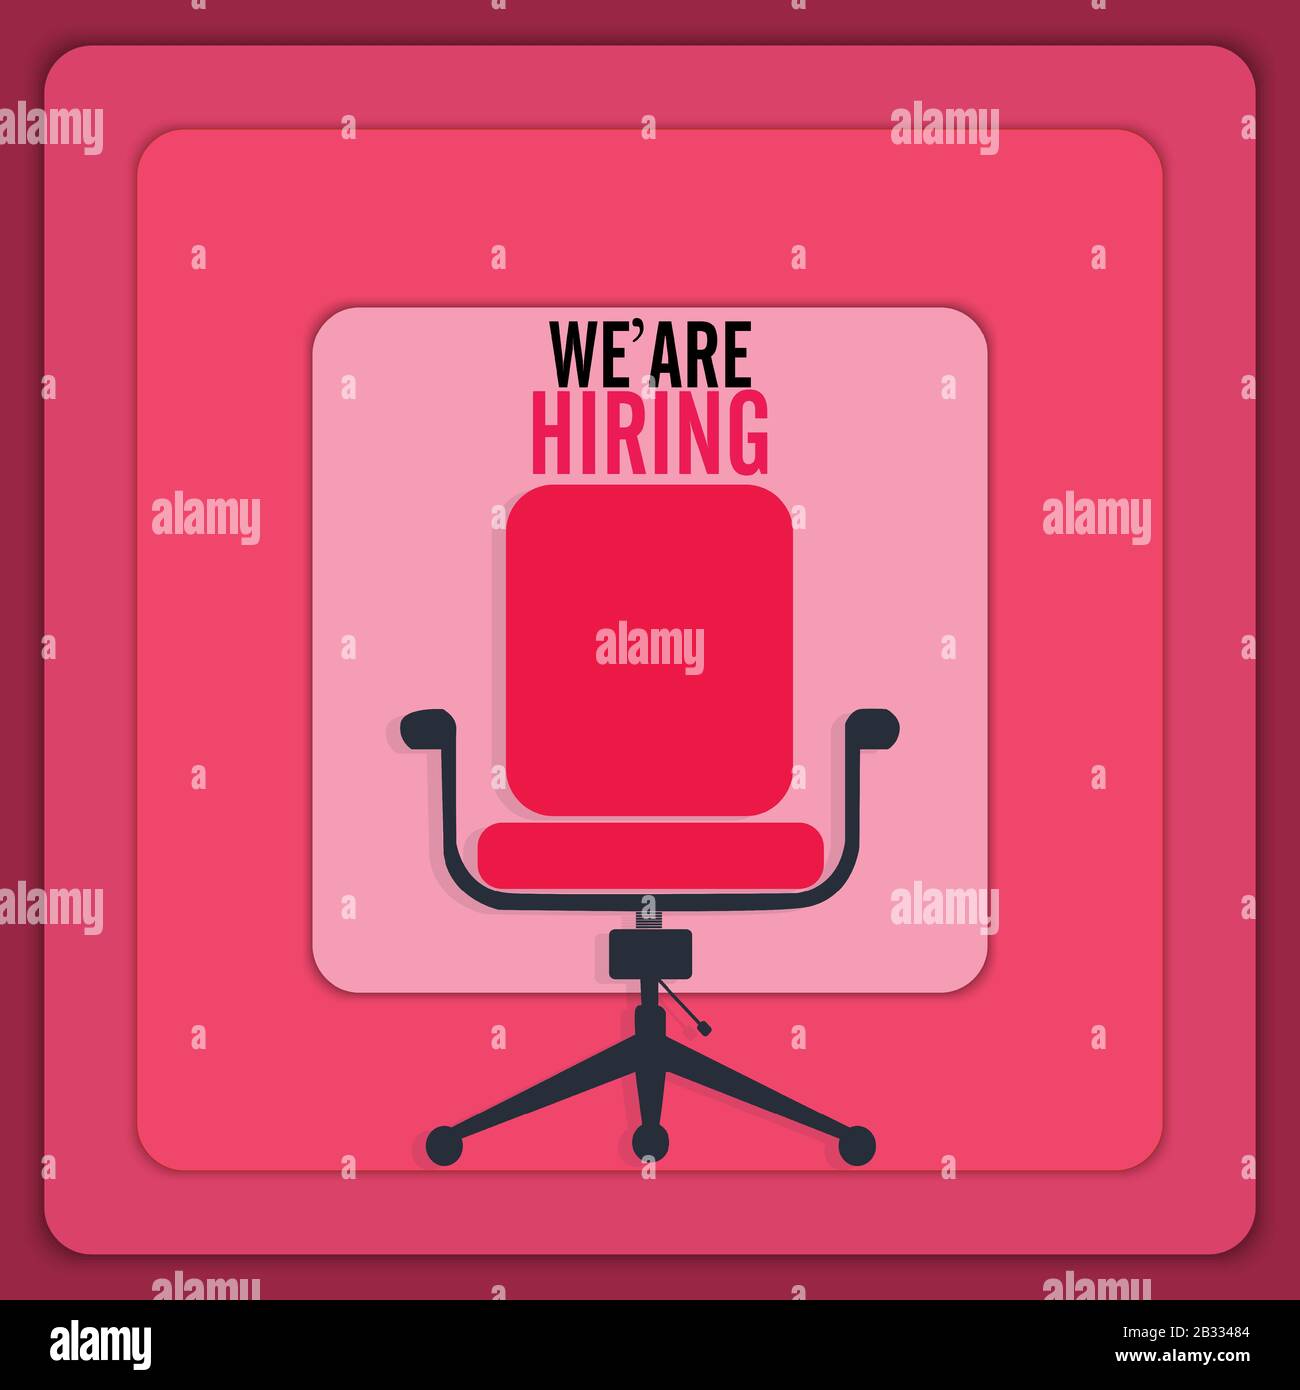 We're hiring with office chair and a sign vacant. Business recruiting design concept. Stock Vector